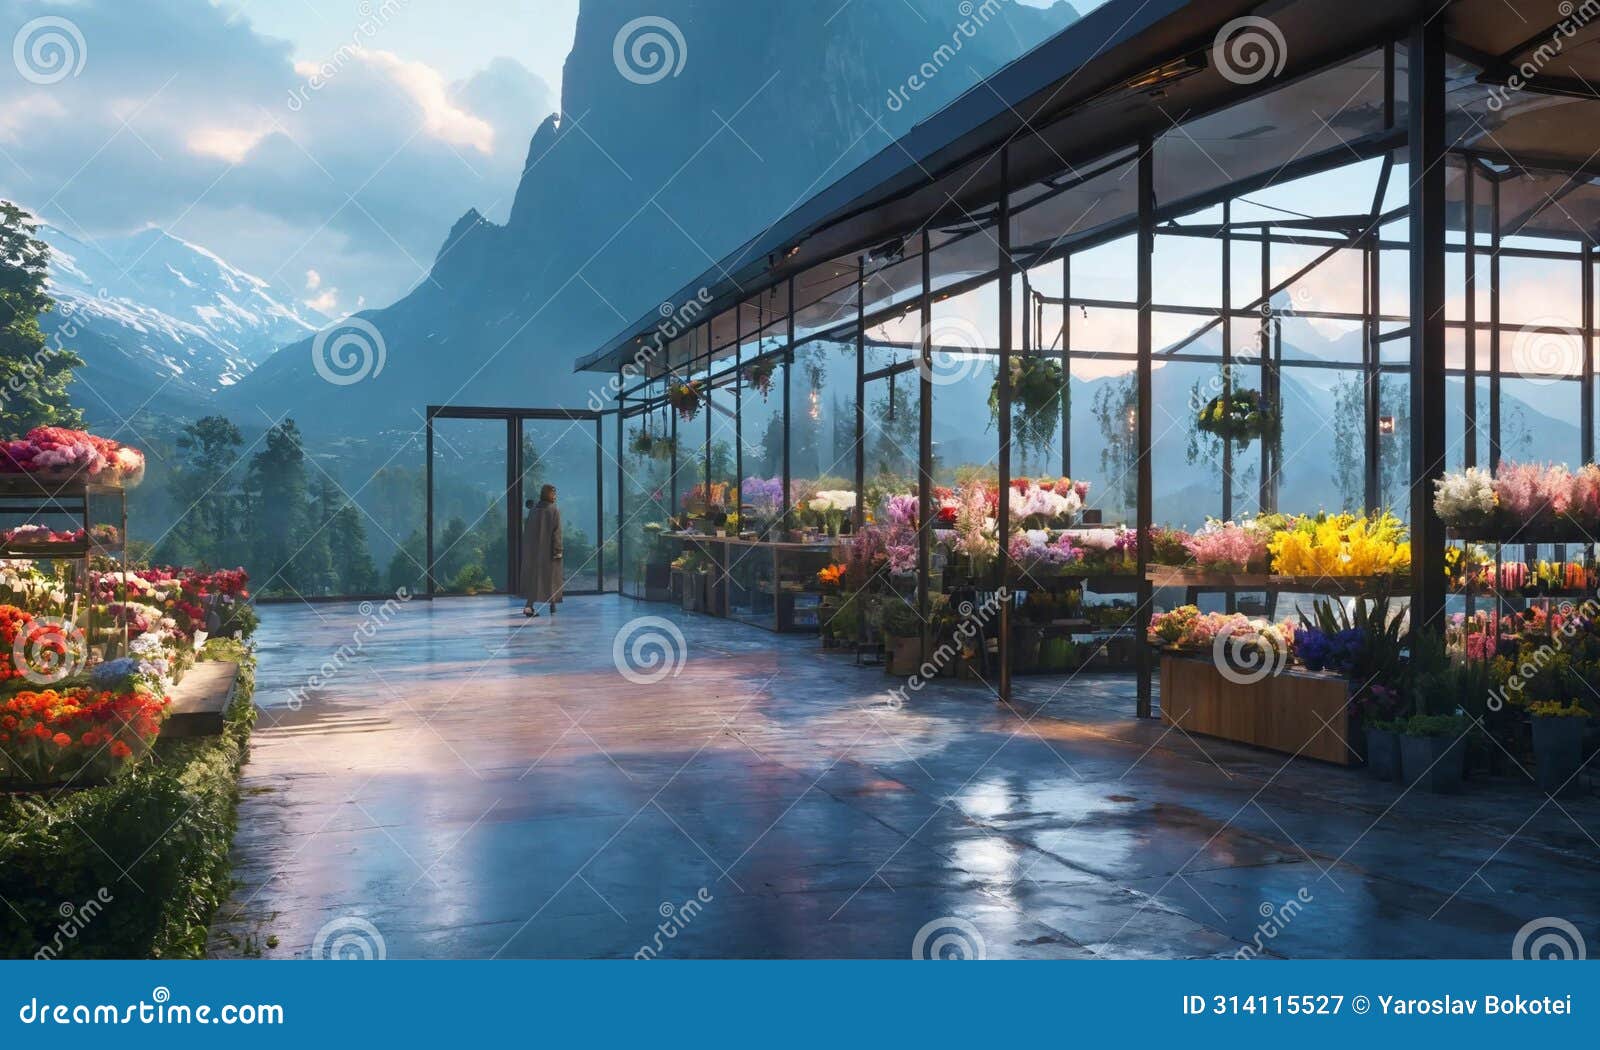 view from the pool. glassed flower shop